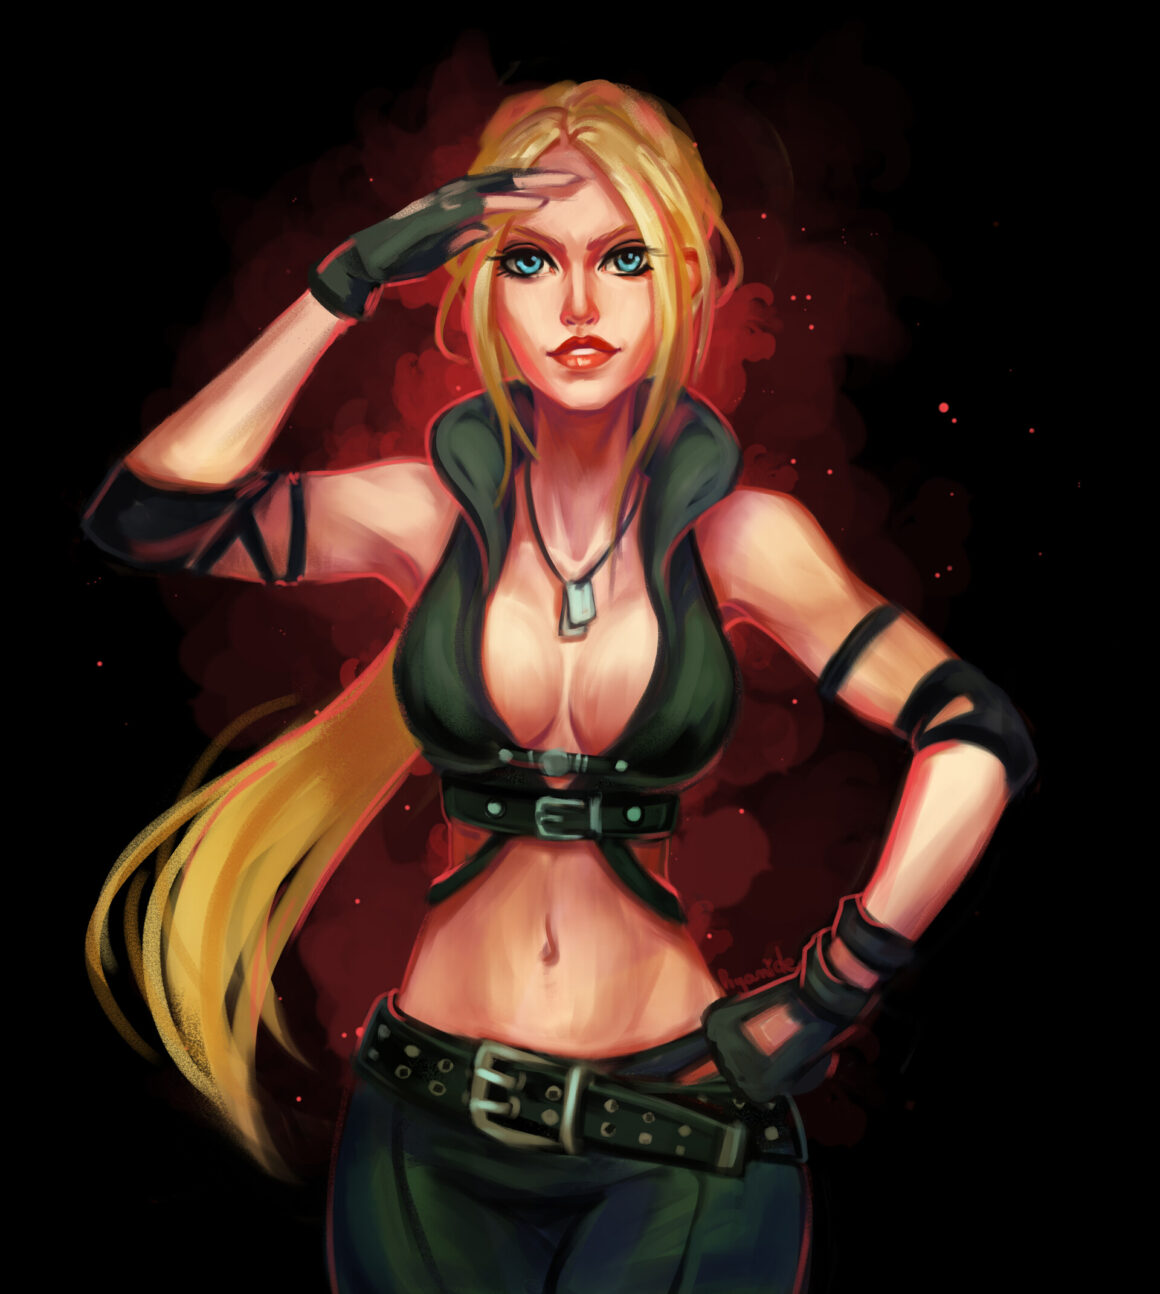 A female character with long blonde hair.